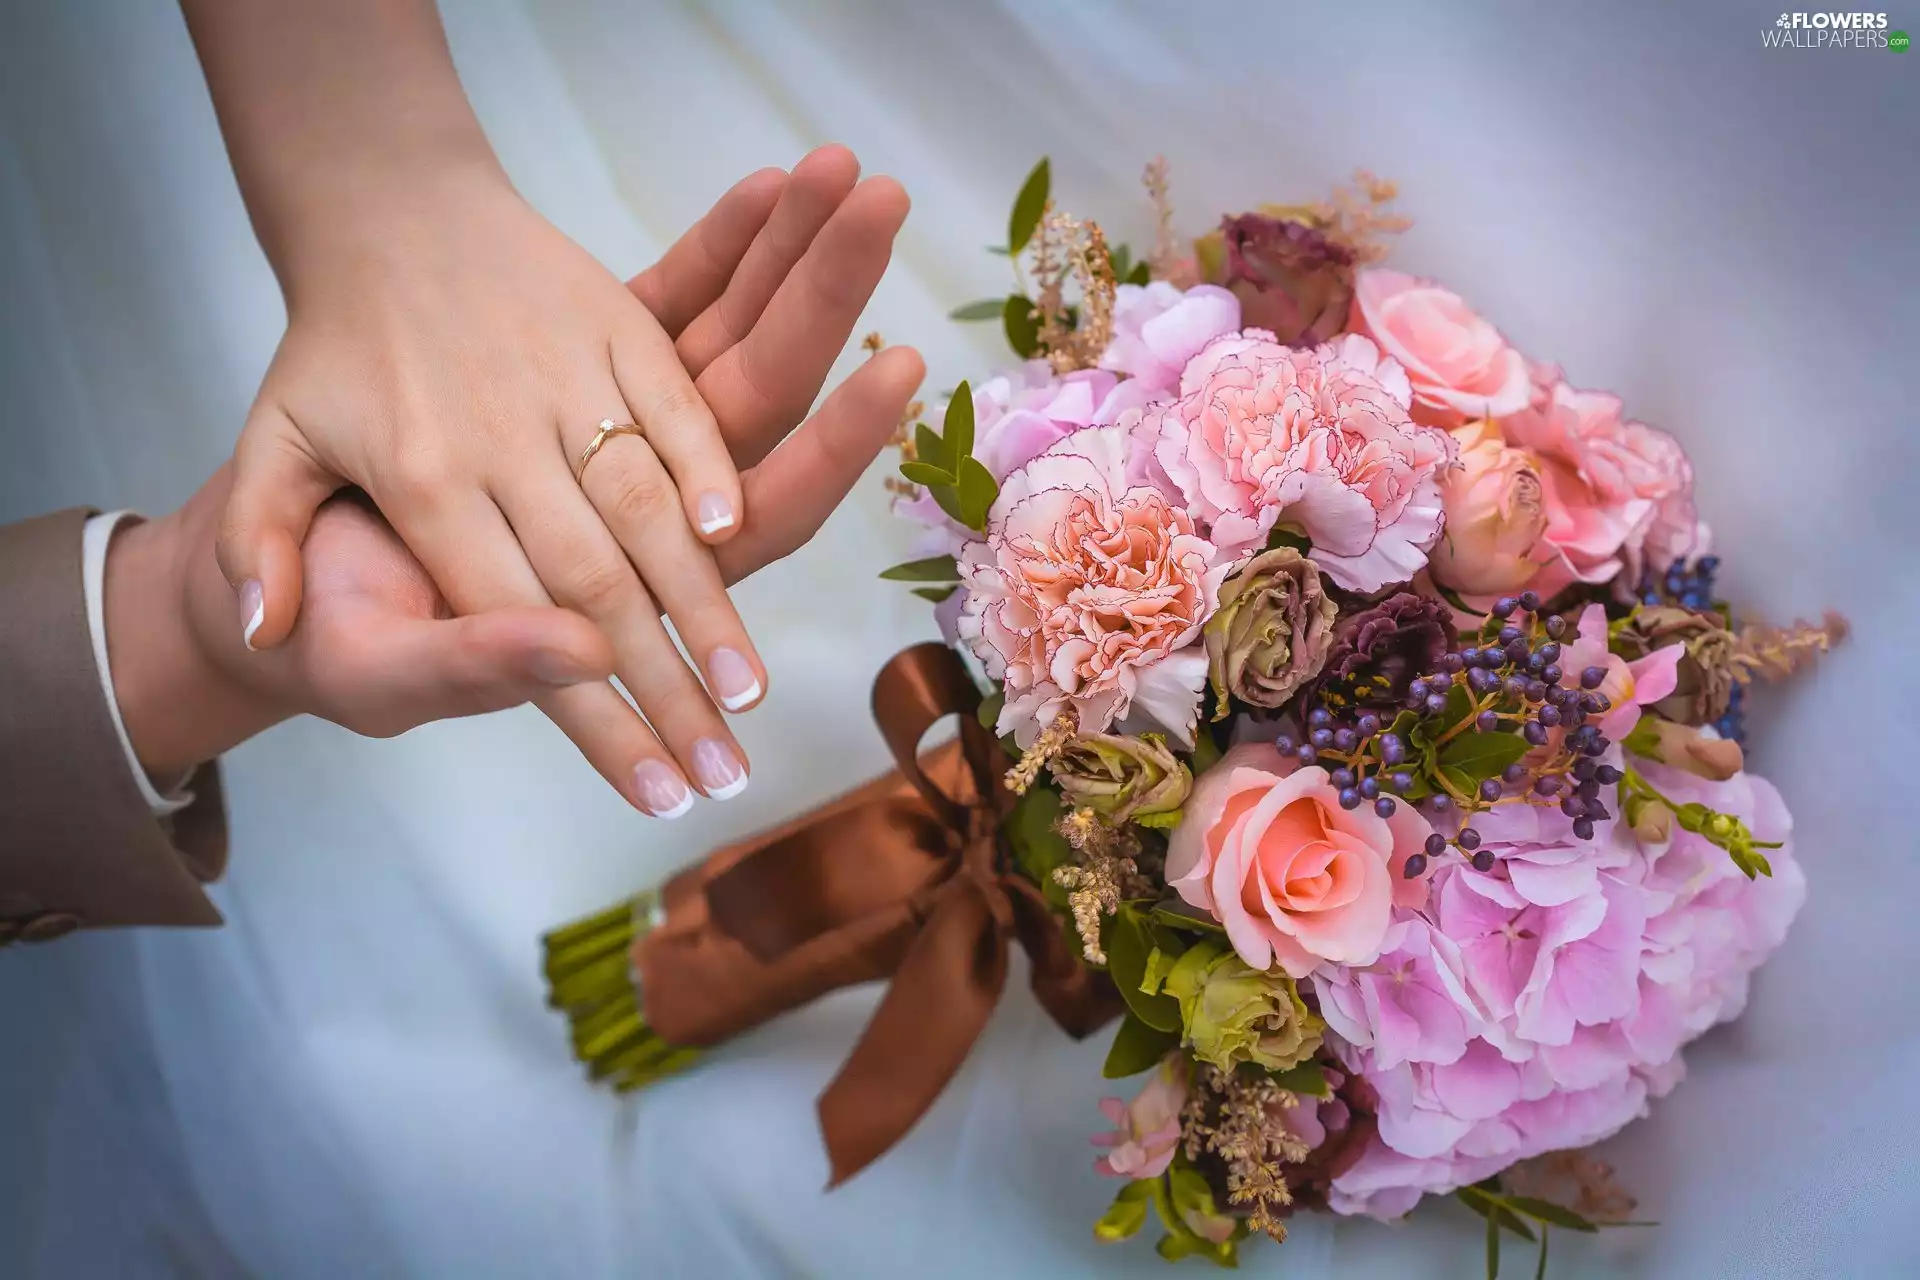 Bouquet of Flowers, hands, marriage